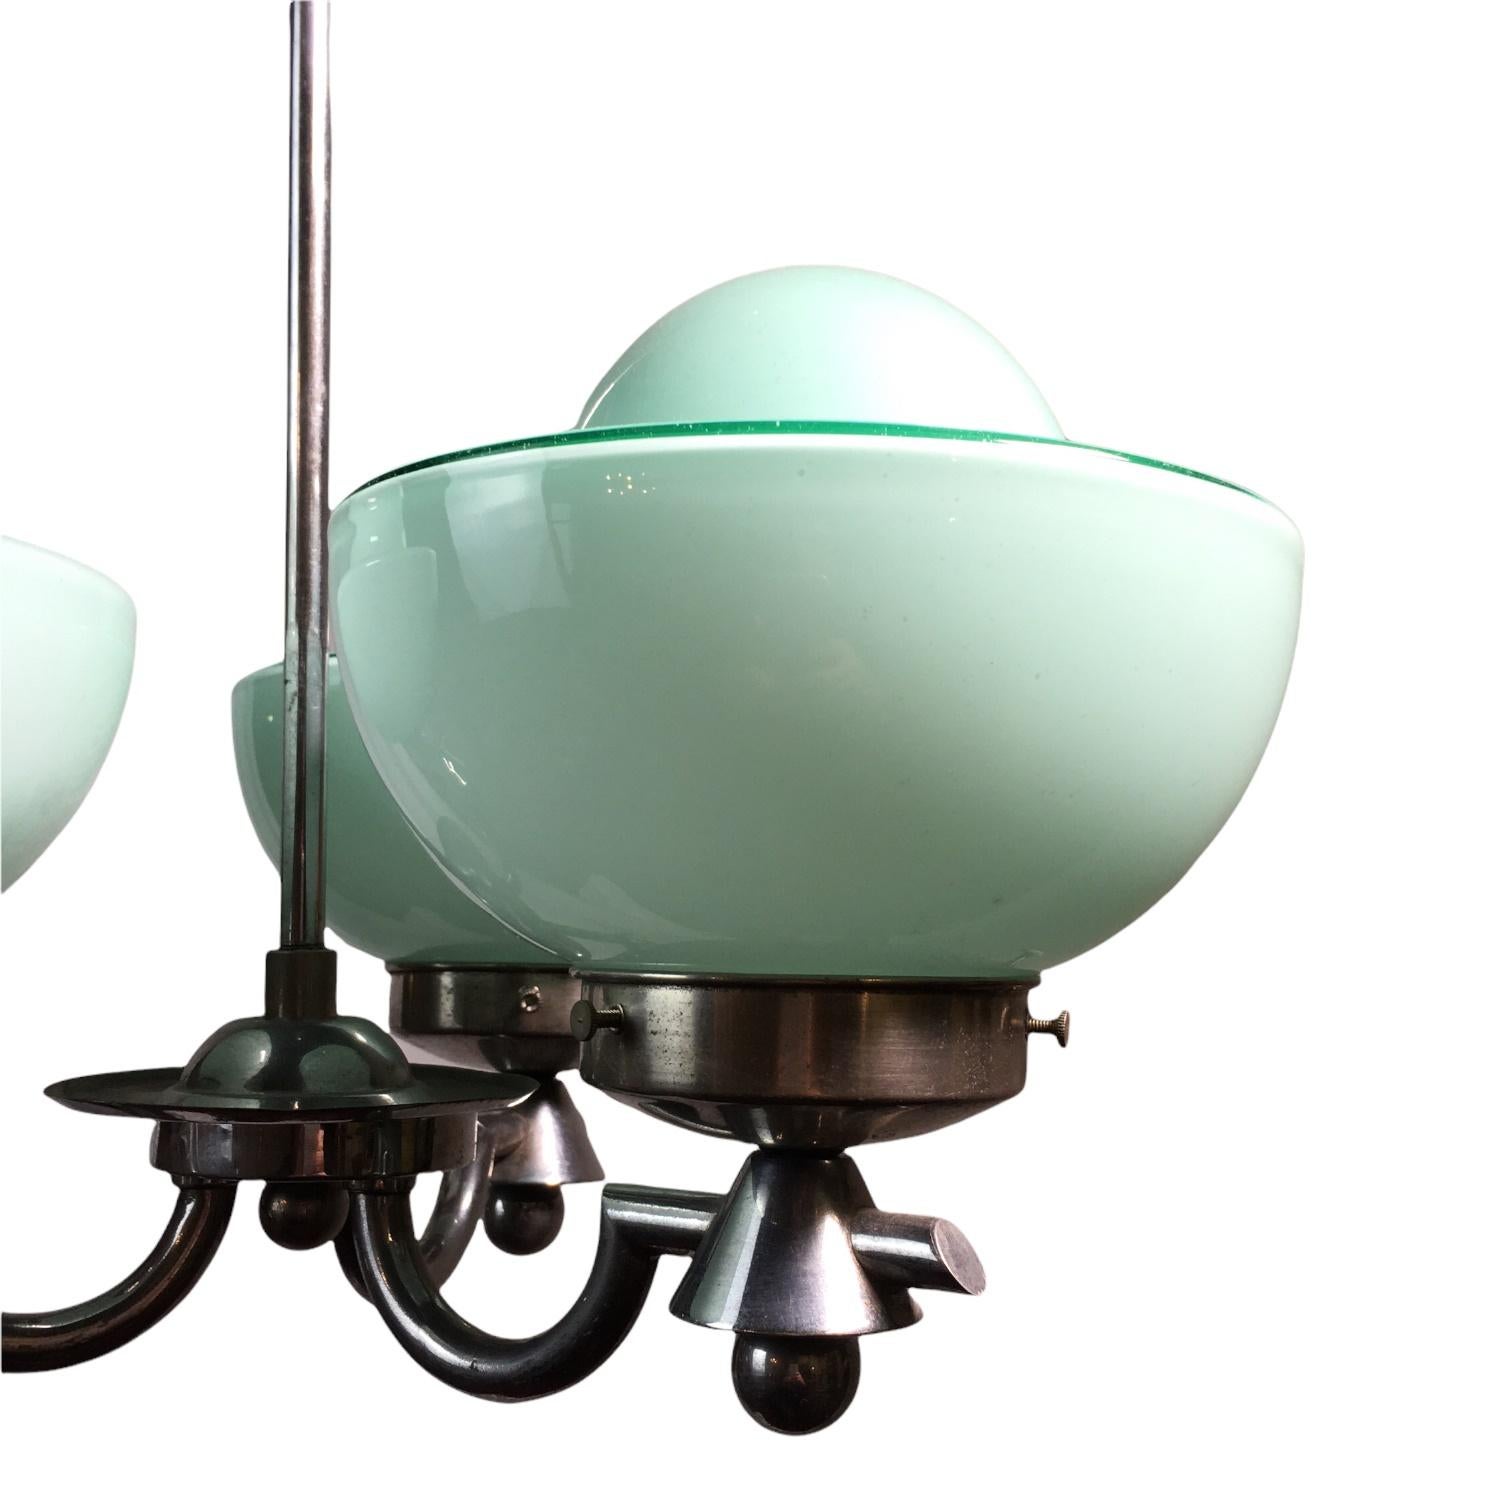 An unusual Art Deco three-arm chandelier in chromed metal with three curved arms with lovely pale blue-green cup-shaped opaline shades. 

- Manufactured in Germany approximately 1930
- Measures: Lampshade height 8 cm, diameter of the globe